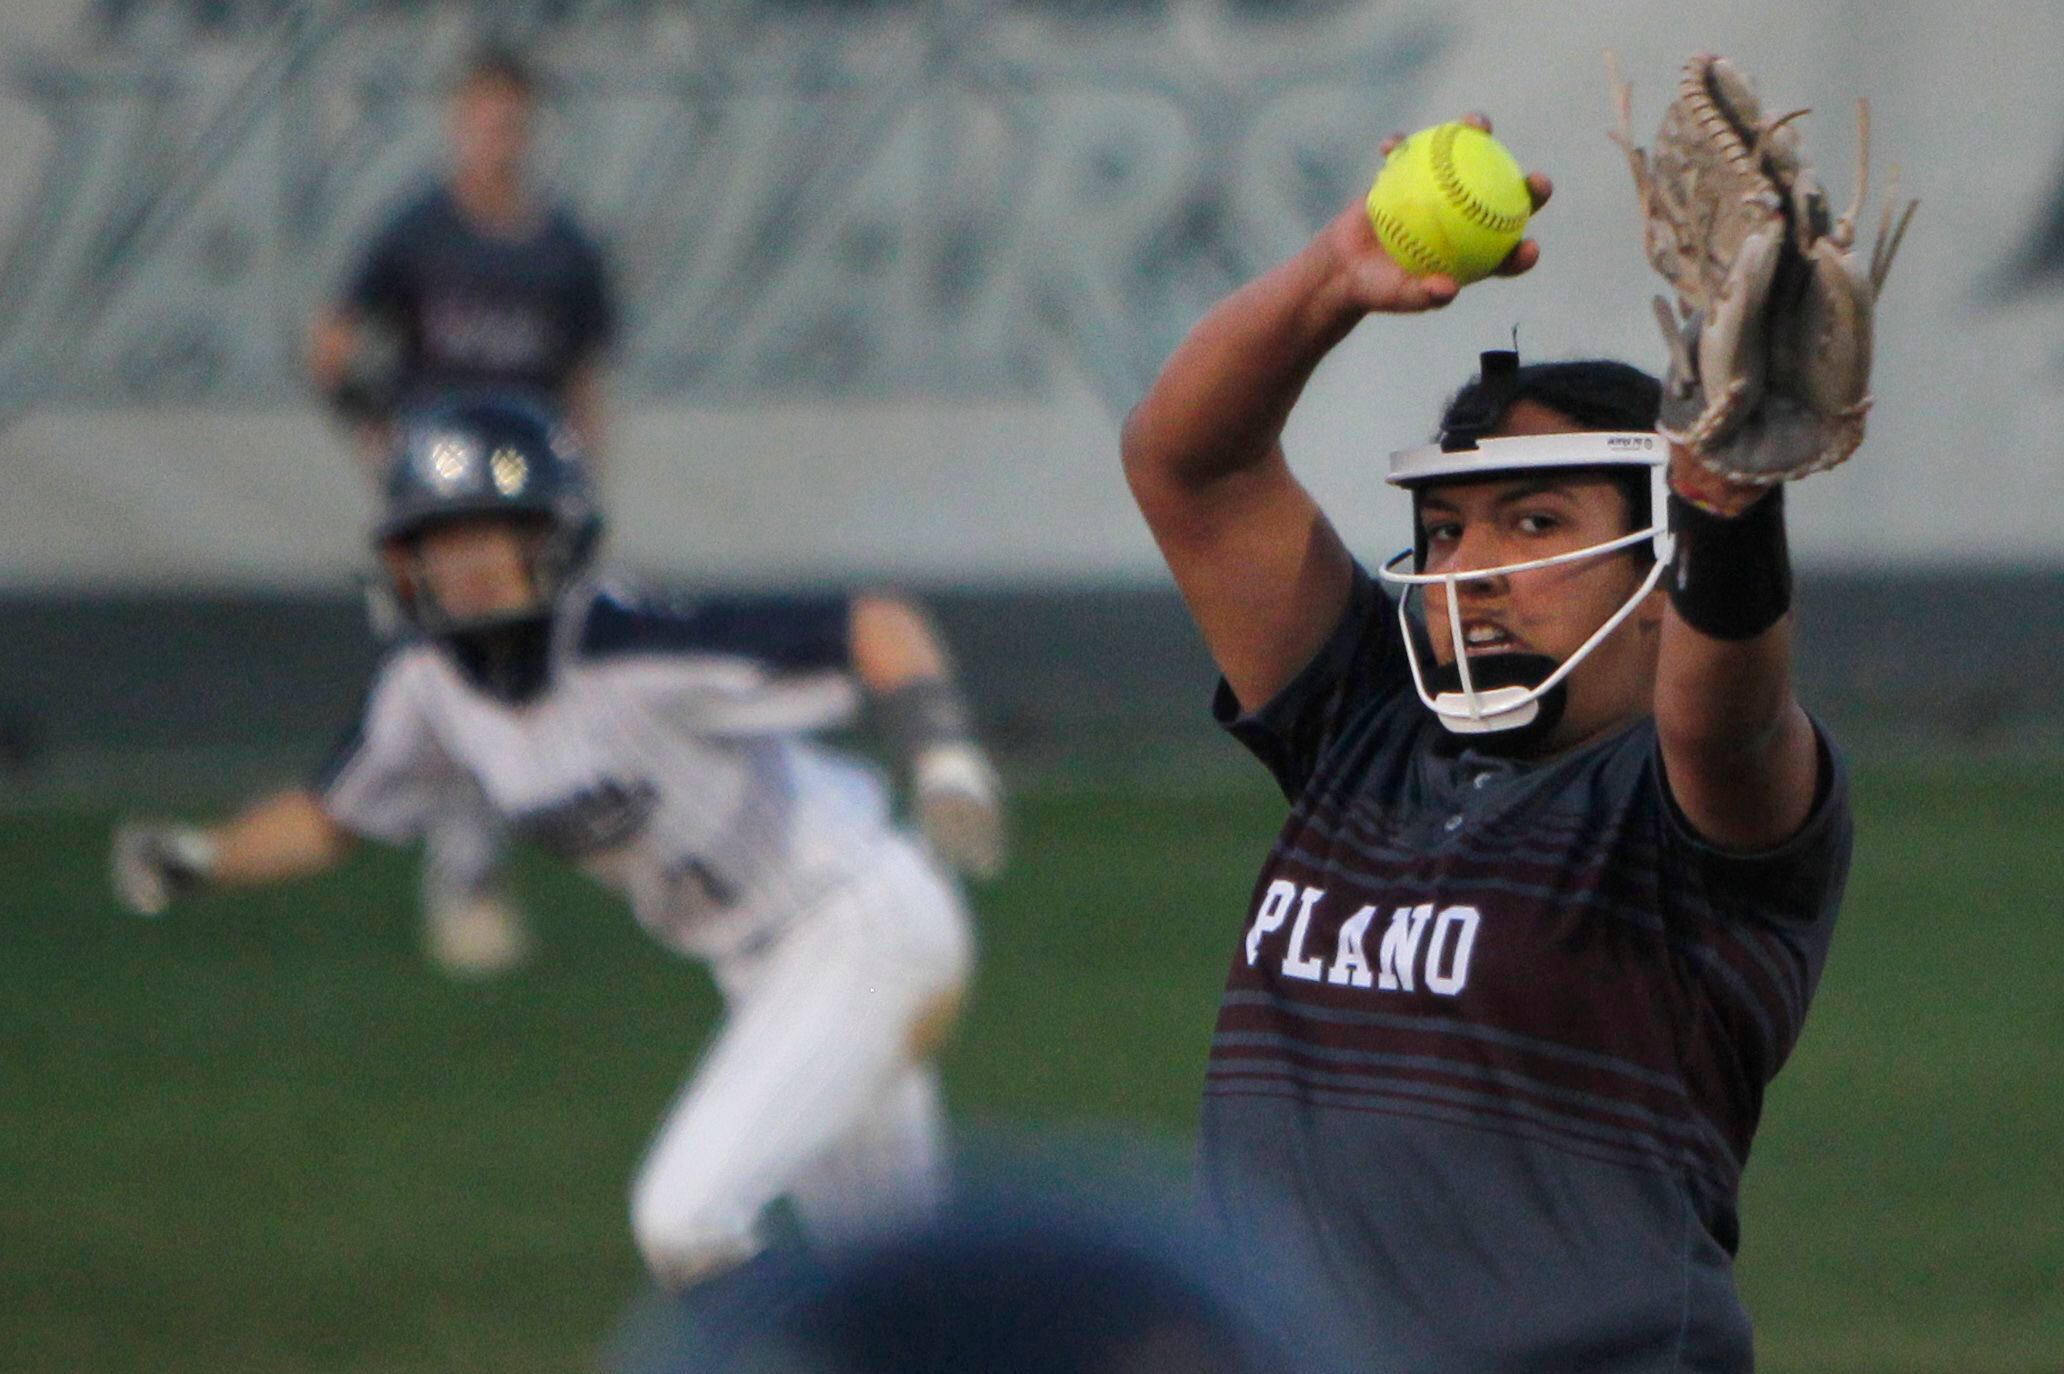 Plano pitcher Jayden Bluitt (20) delivers a pitch to a Plano batter during the bottom of the...